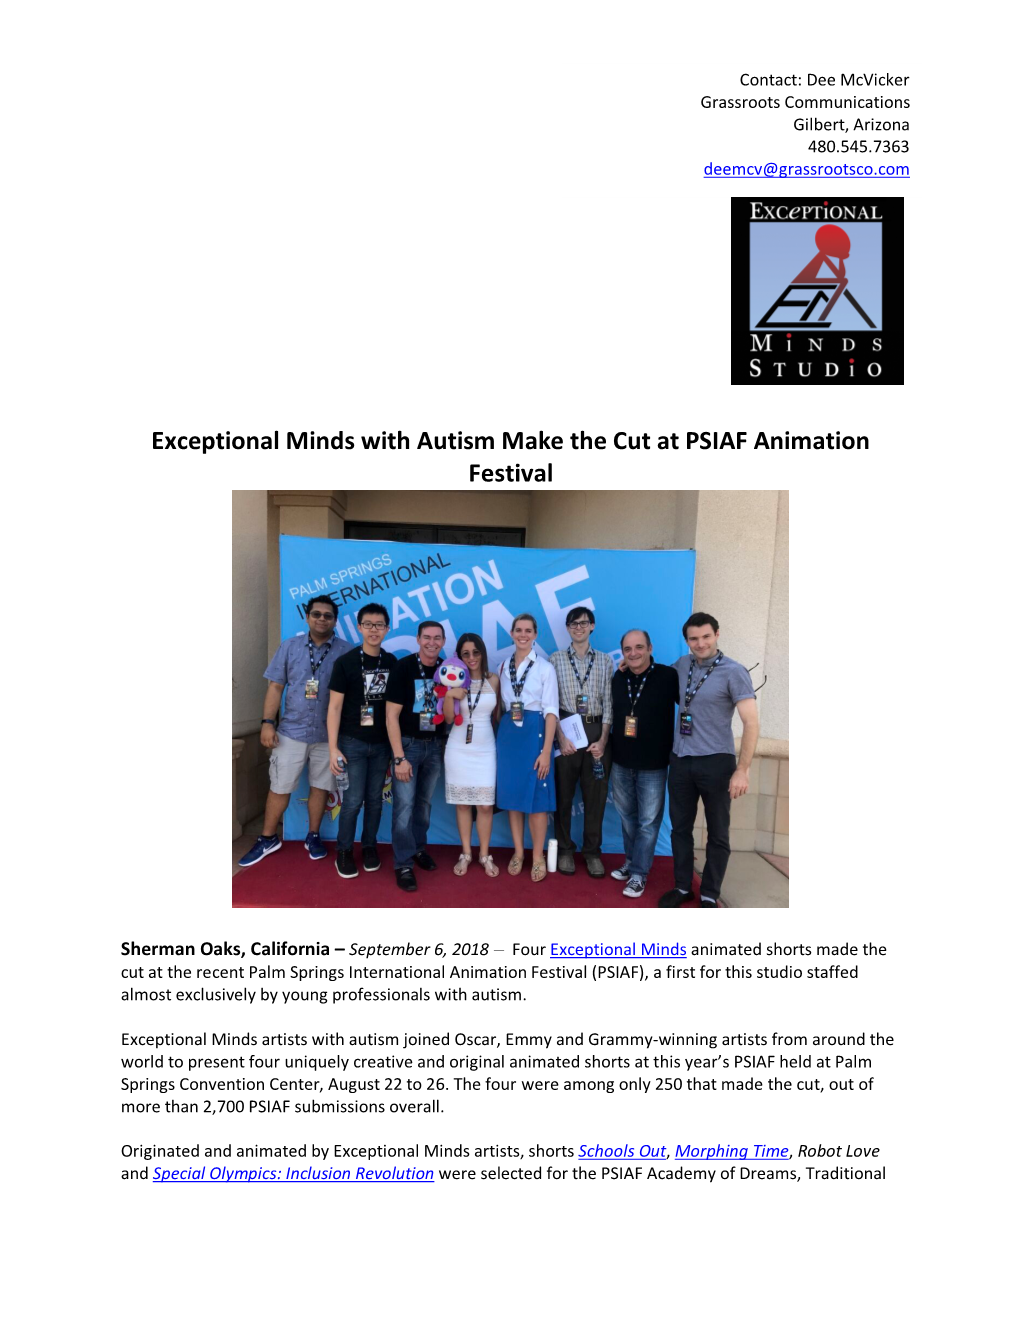 Exceptional Minds with Autism Make the Cut at PSIAF Animation Festival